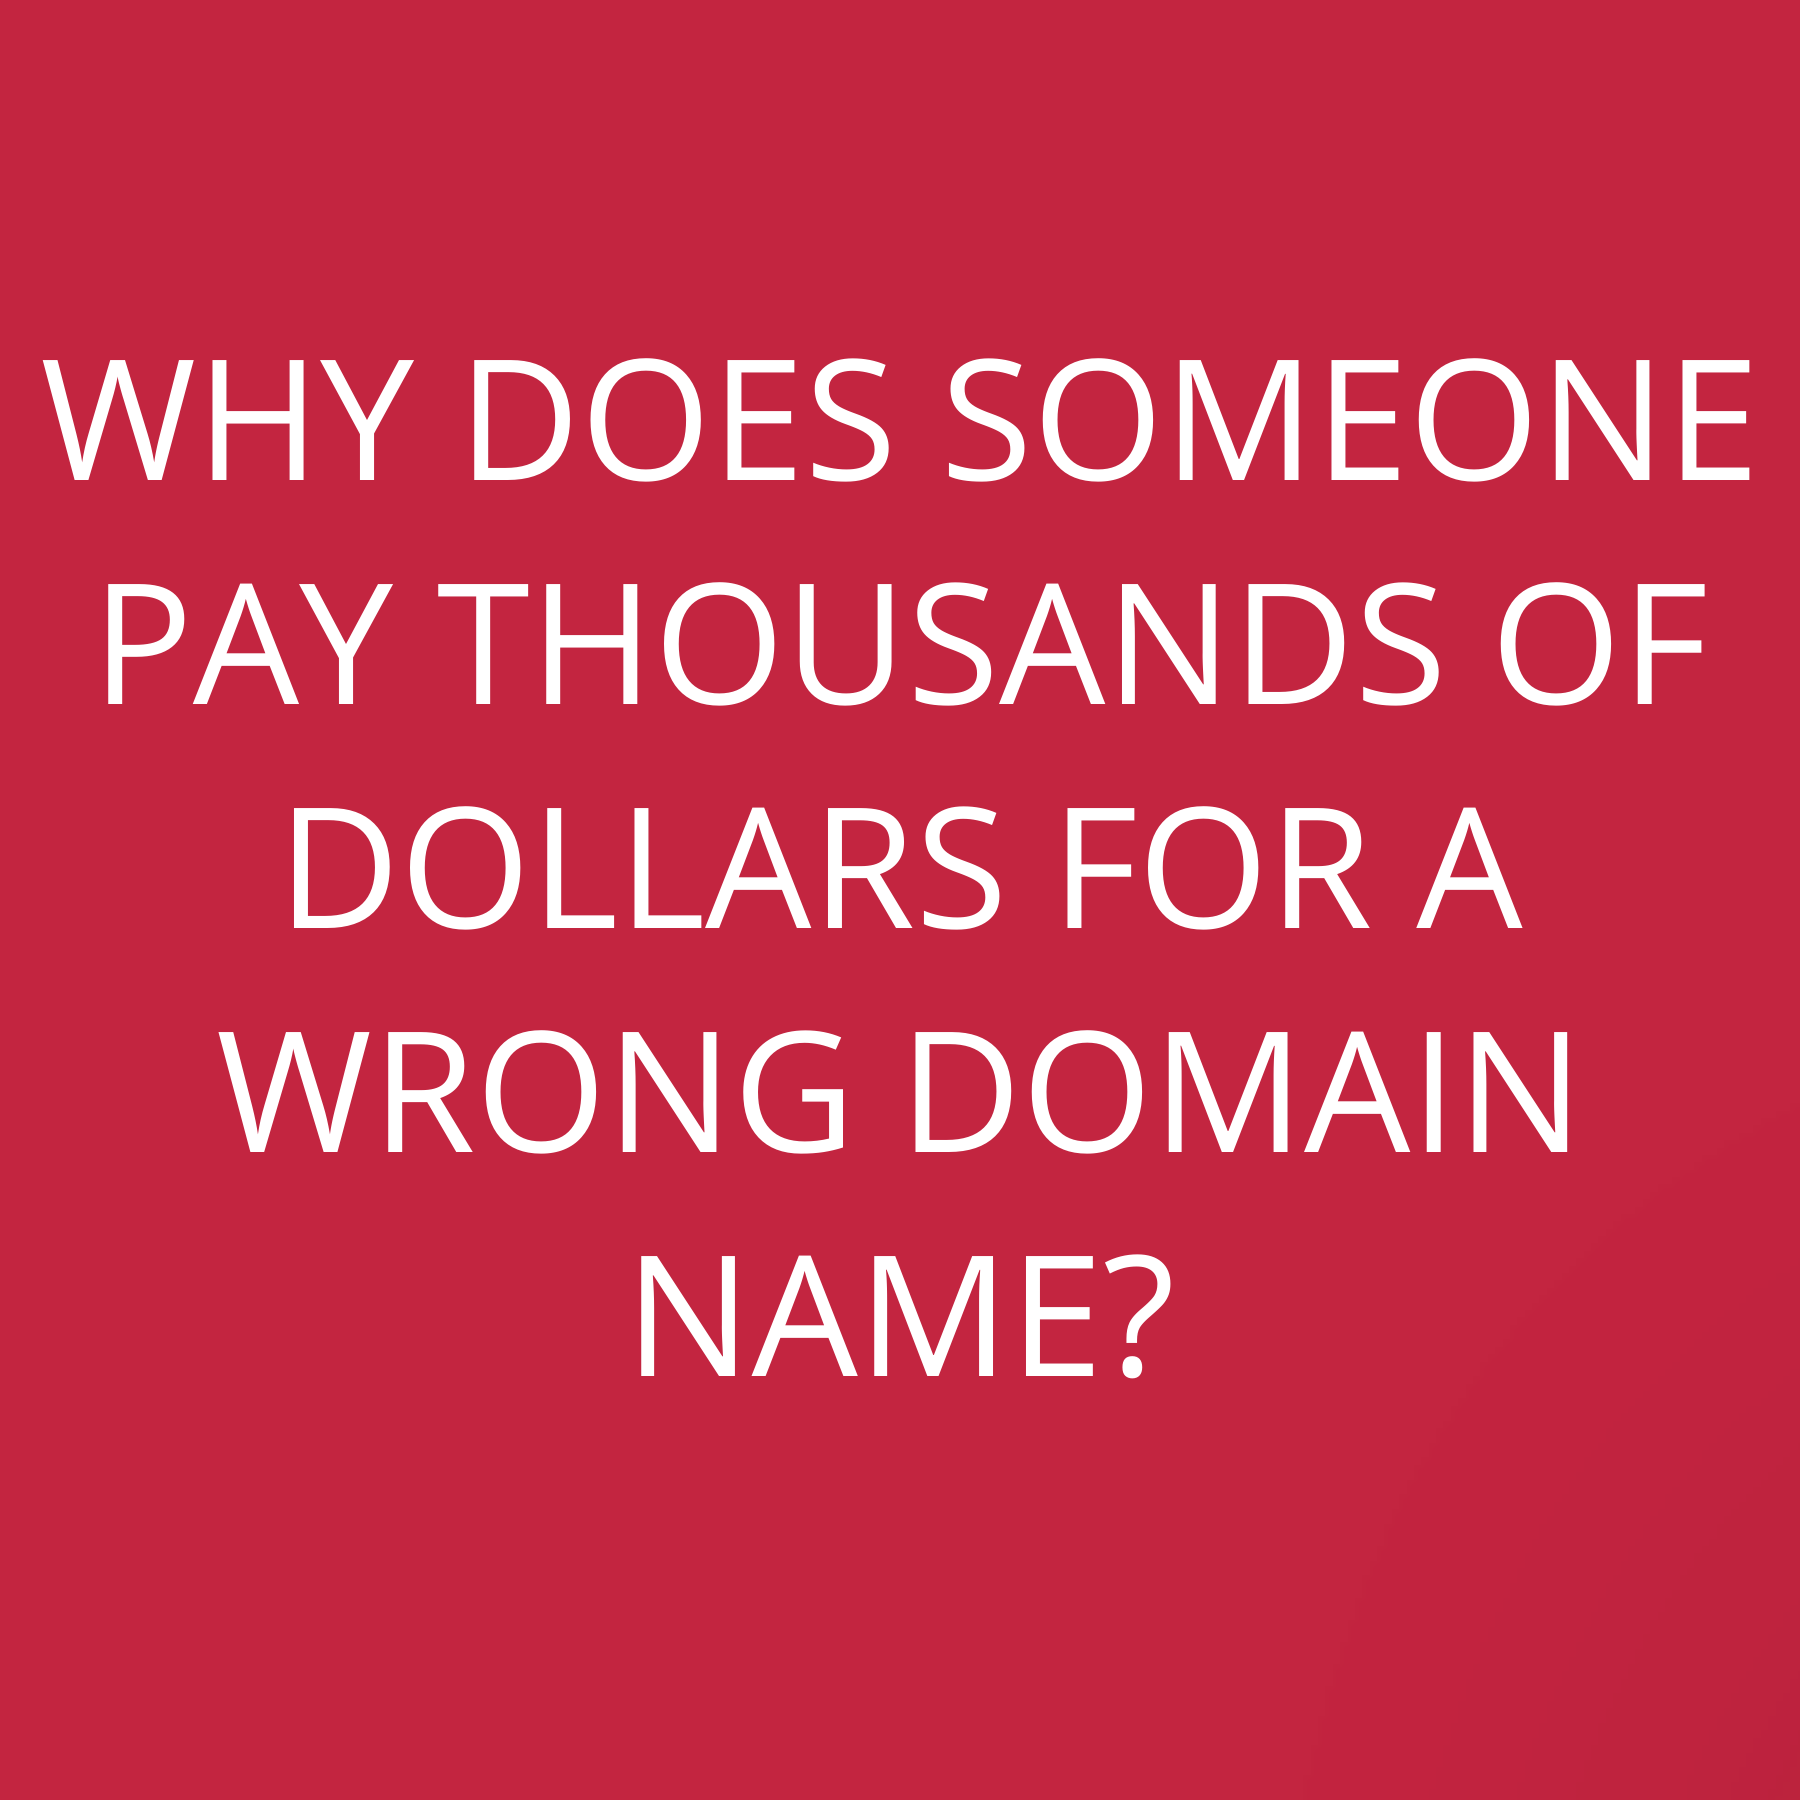 Why does someone pay thousands of dollars for a wrong domain name?